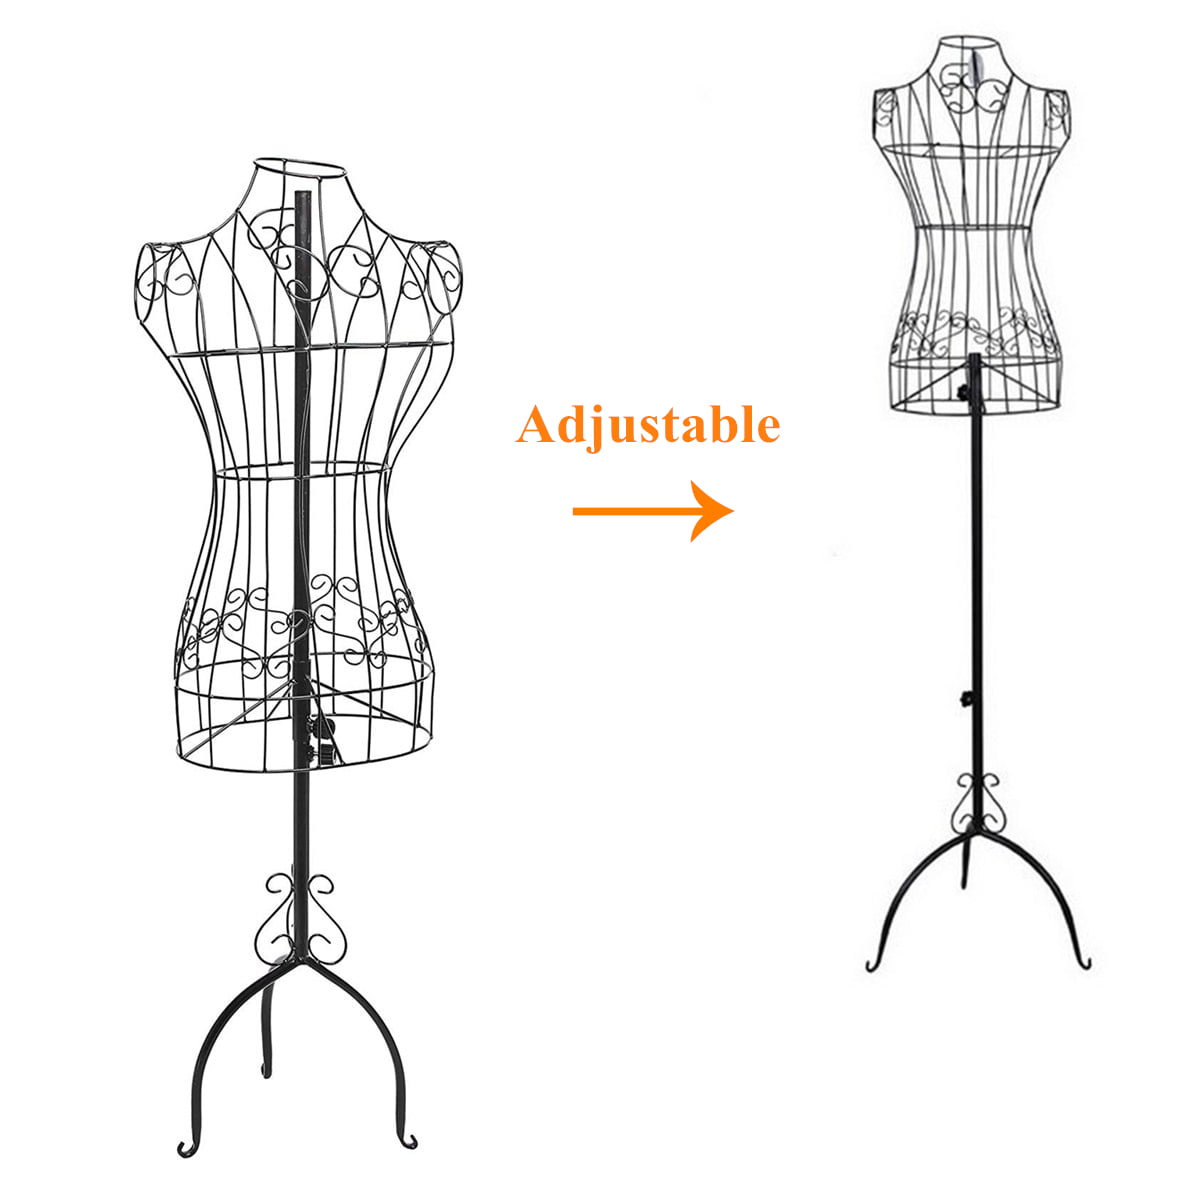 Dress Form Stand For Sale / Ktaxon Black Female Mannequin Torso Dress Form Display W ... / Online shopping for dress forms from a great selection at arts, crafts & sewing store.